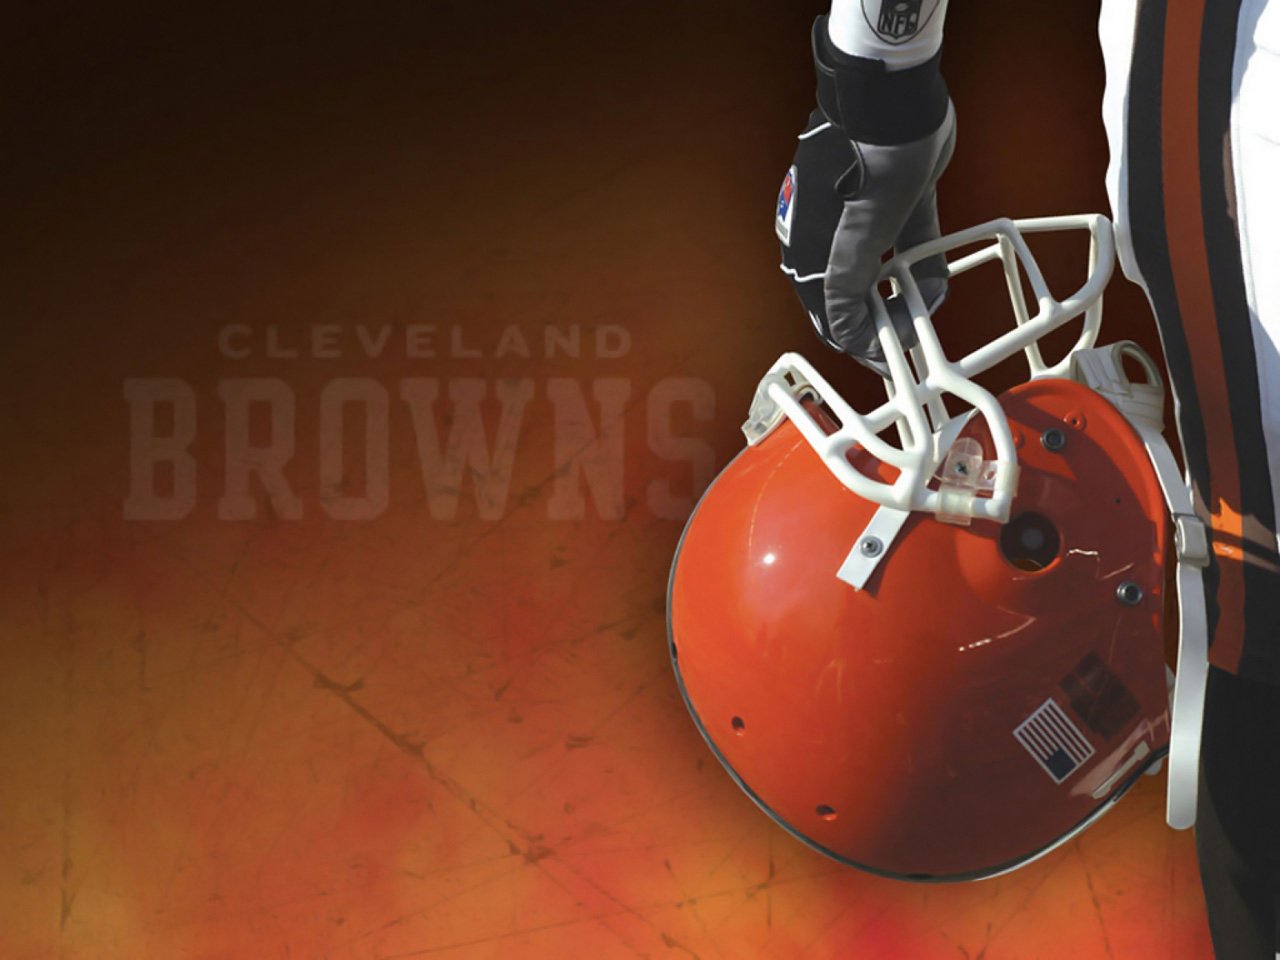 [48+] Cleveland Browns Screensavers Wallpapers on ...